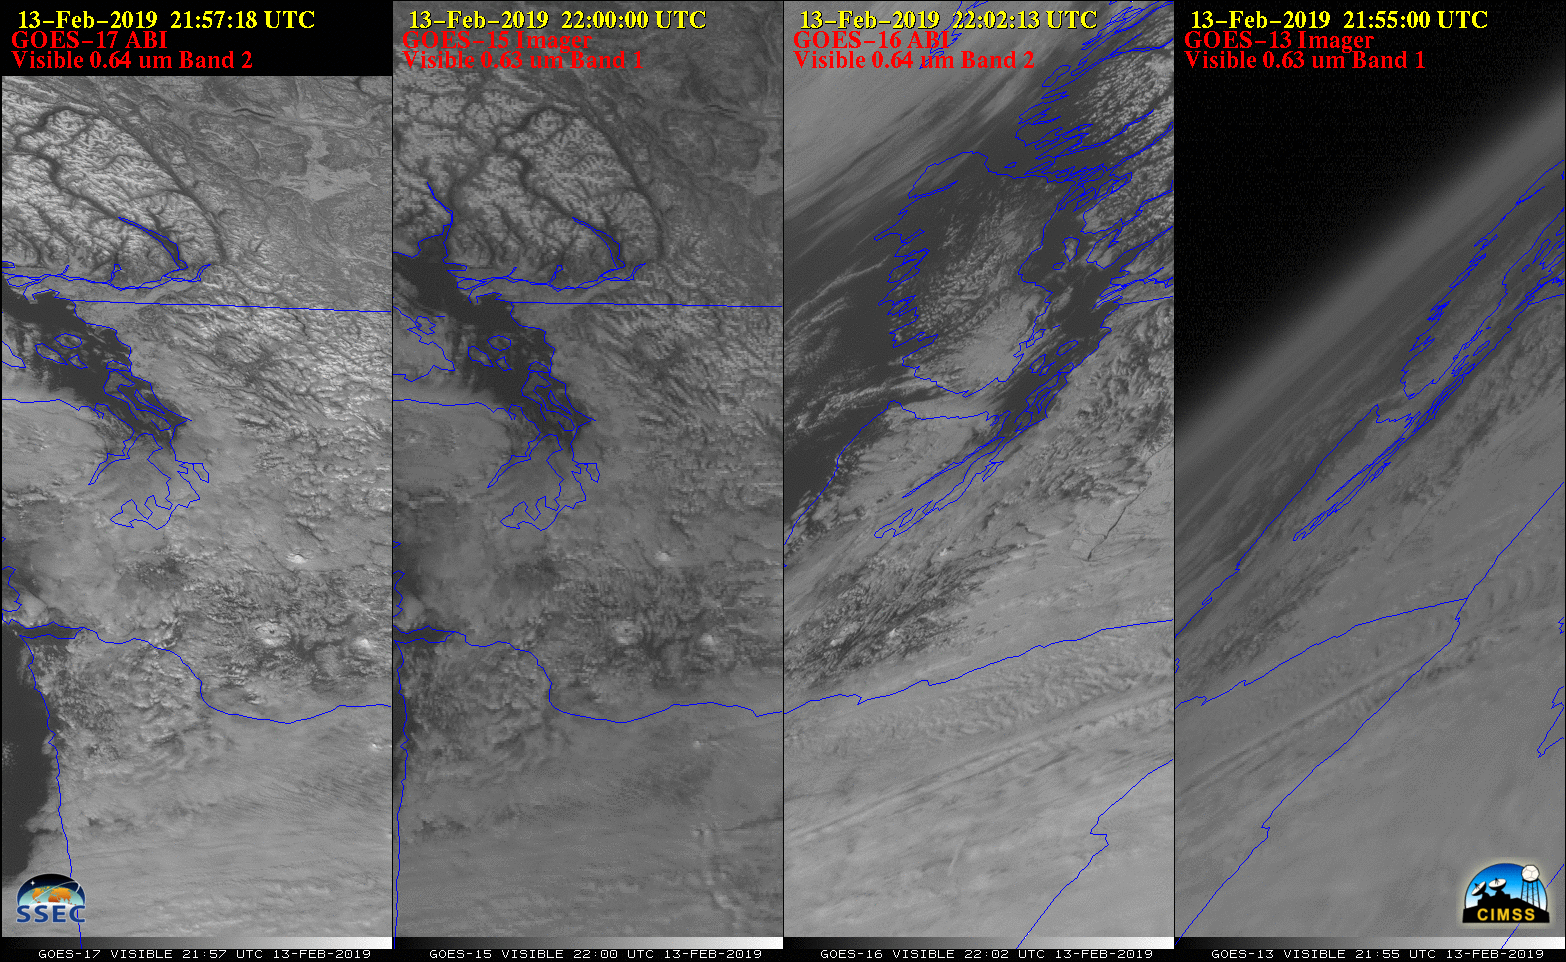 Visible images, centered at Seattle, from (left to right) GOES-17, GOES-15, GOES-16 and GOES-13 [click to play animation | MP4]